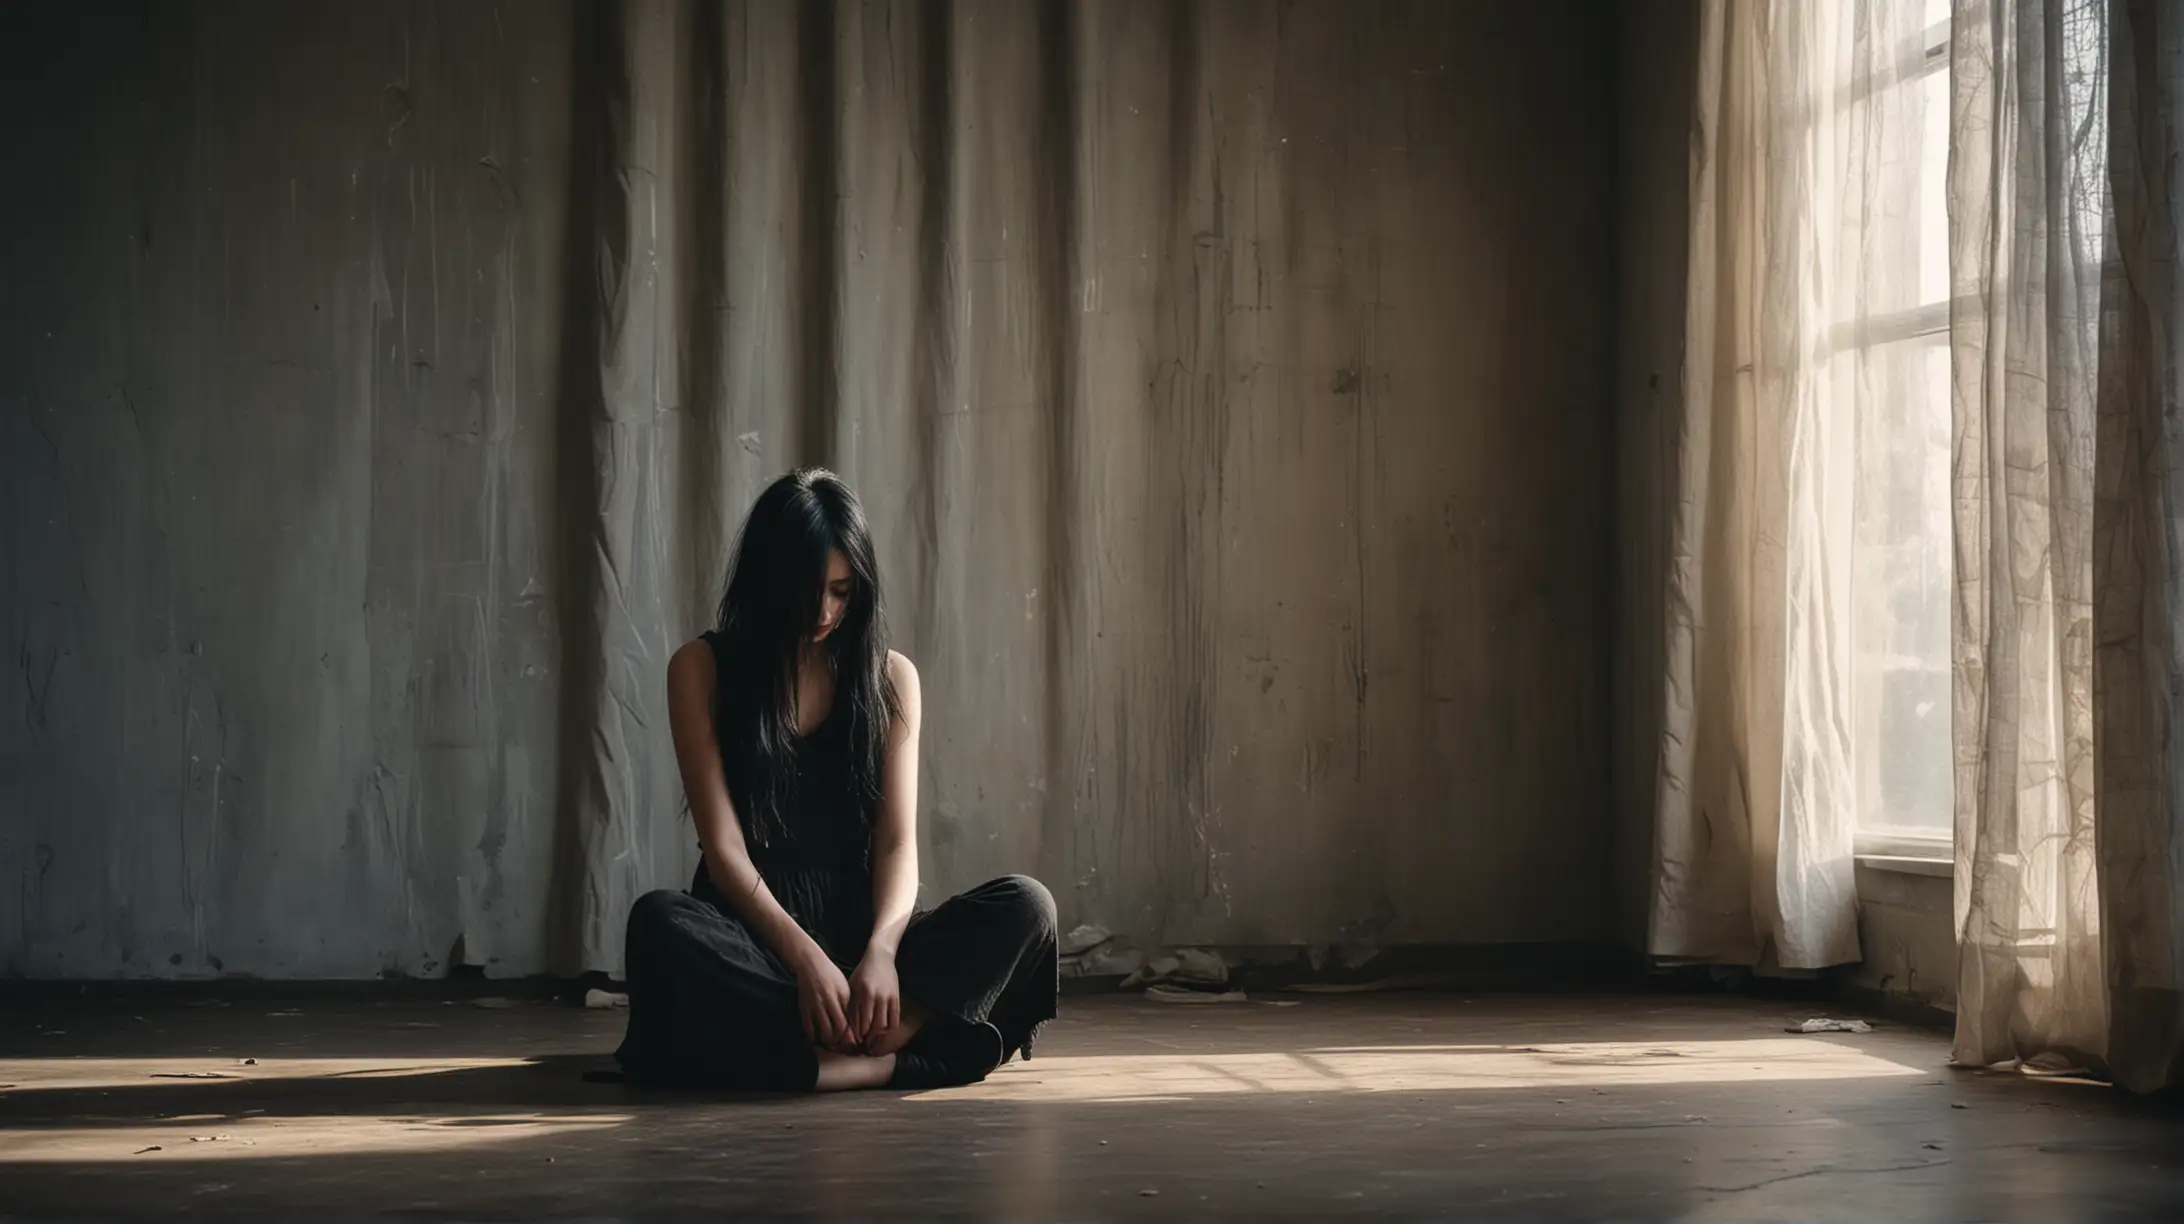 girl sitting side without face with black hair, grunge atmosphere, in a large empty room, light from the window with curtains